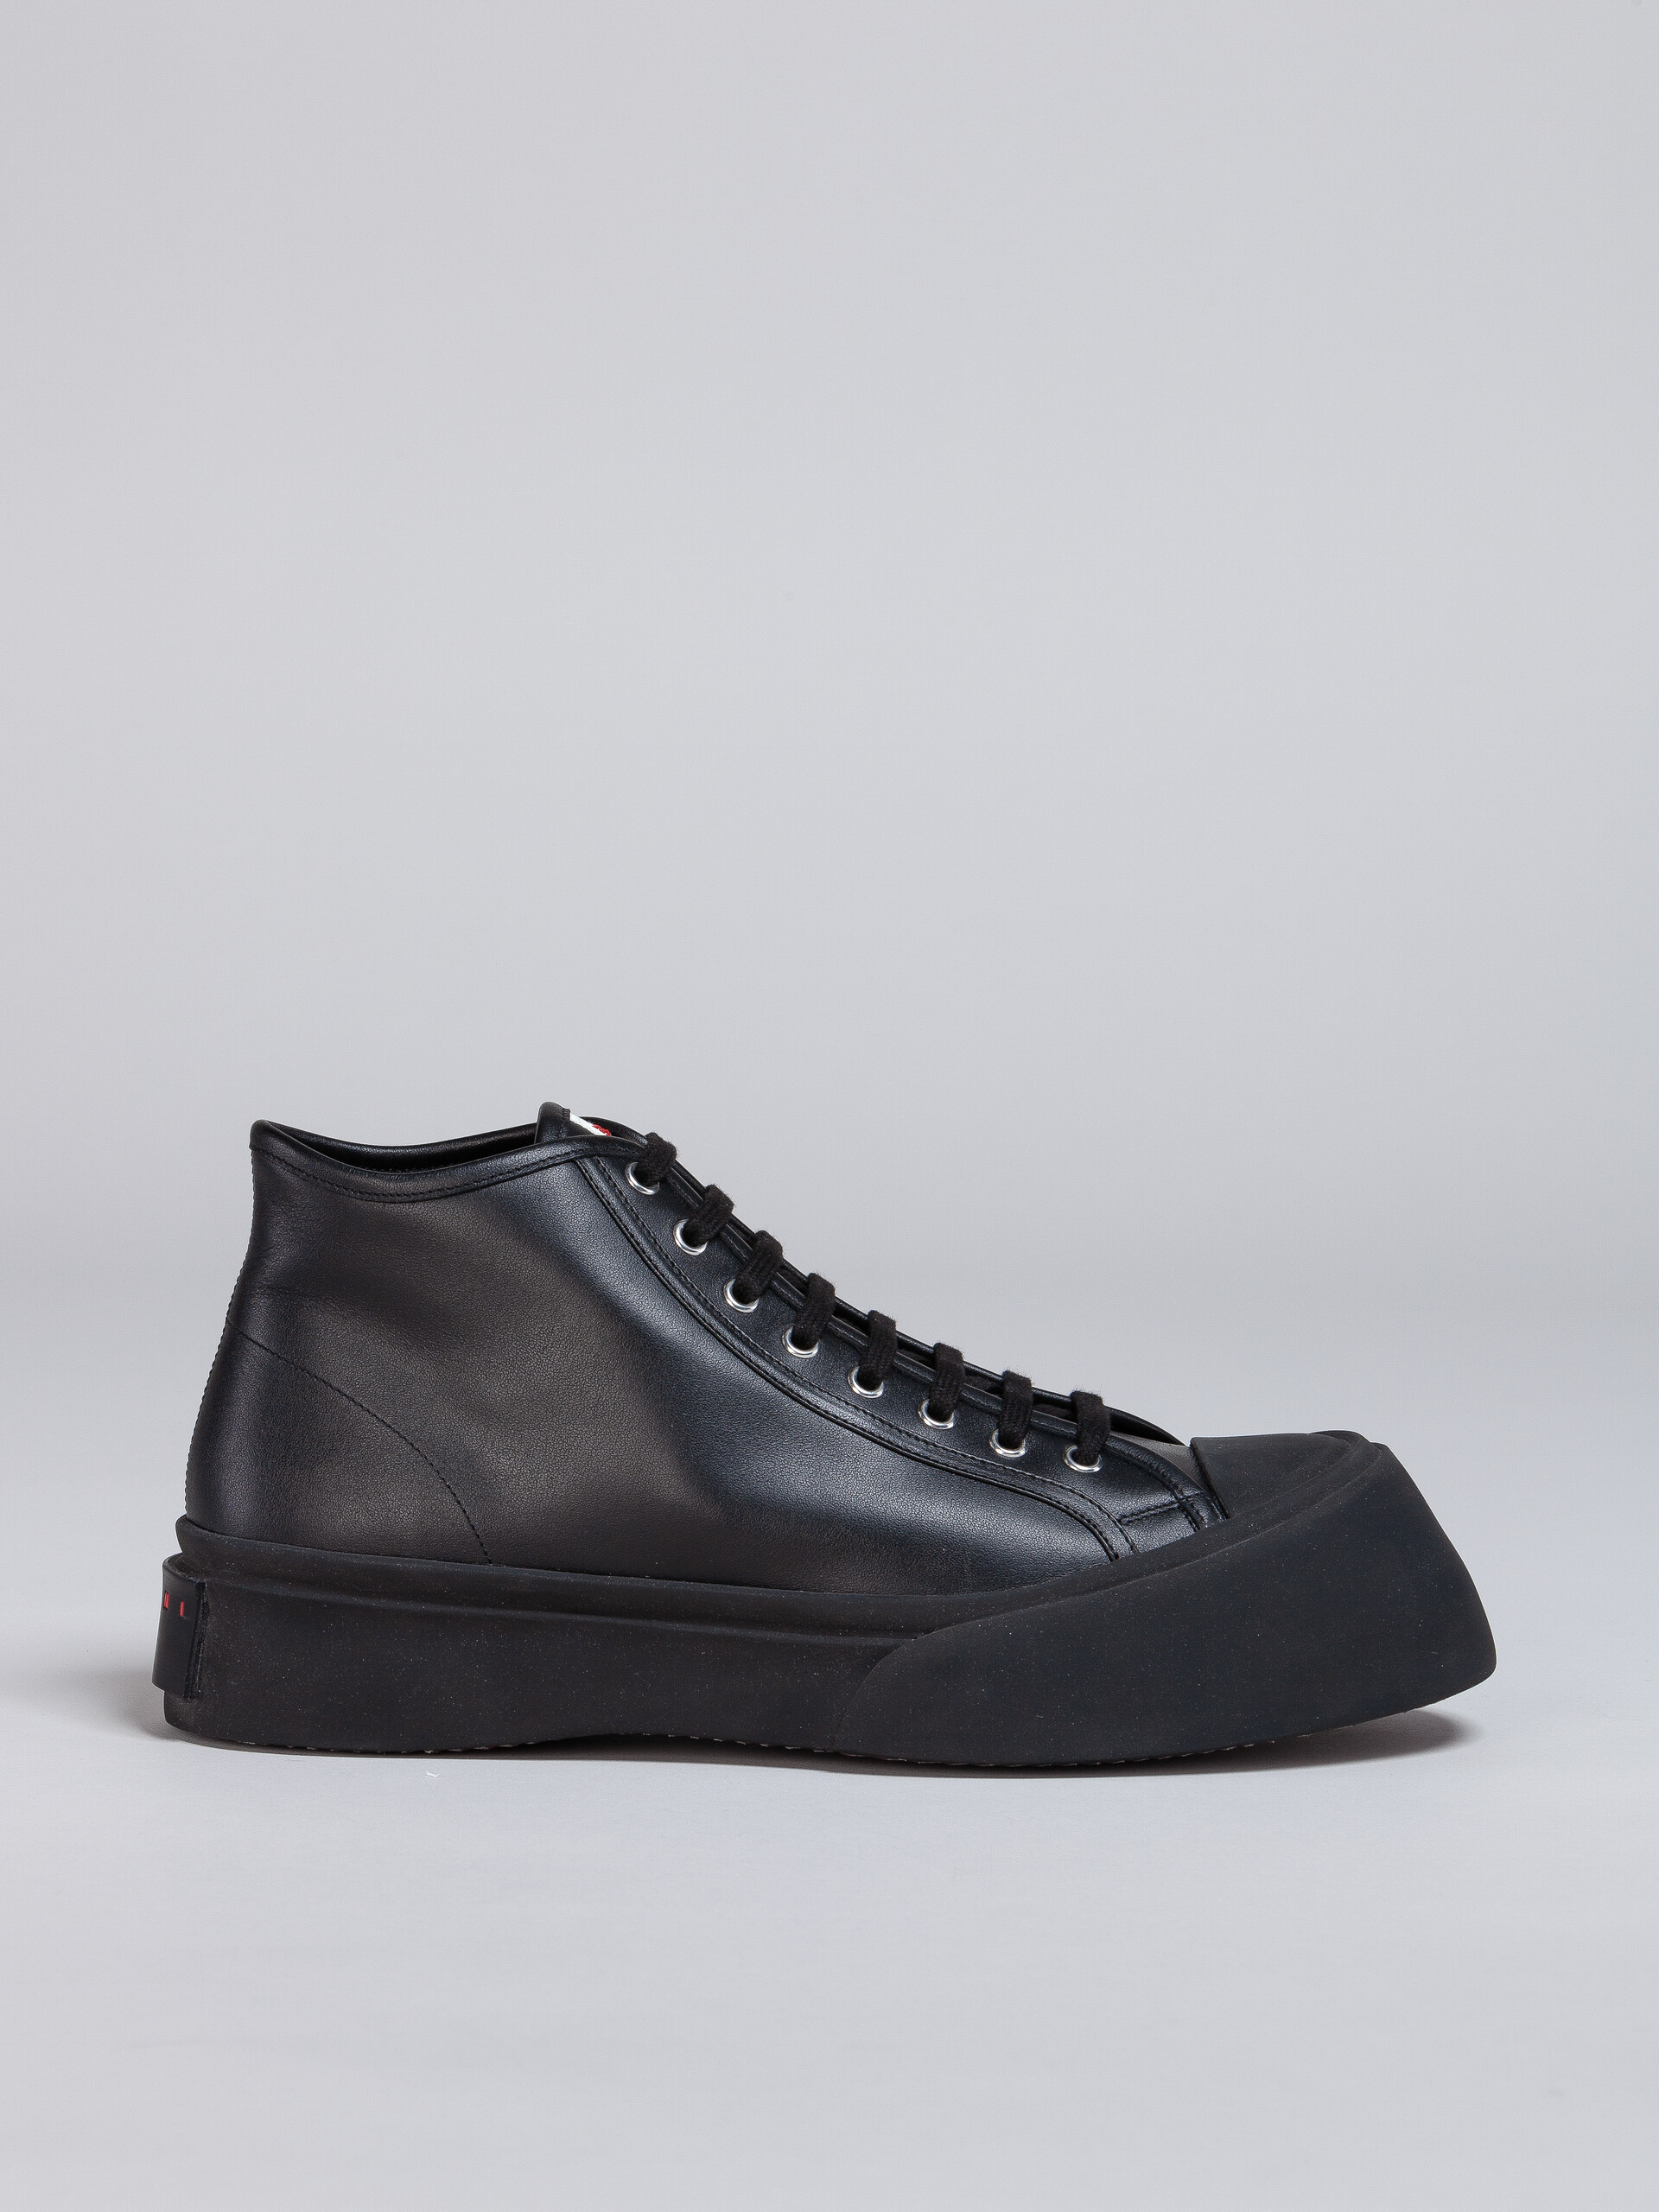 Black leather PABLO high-top  sneaker - Sneakers - Image 1